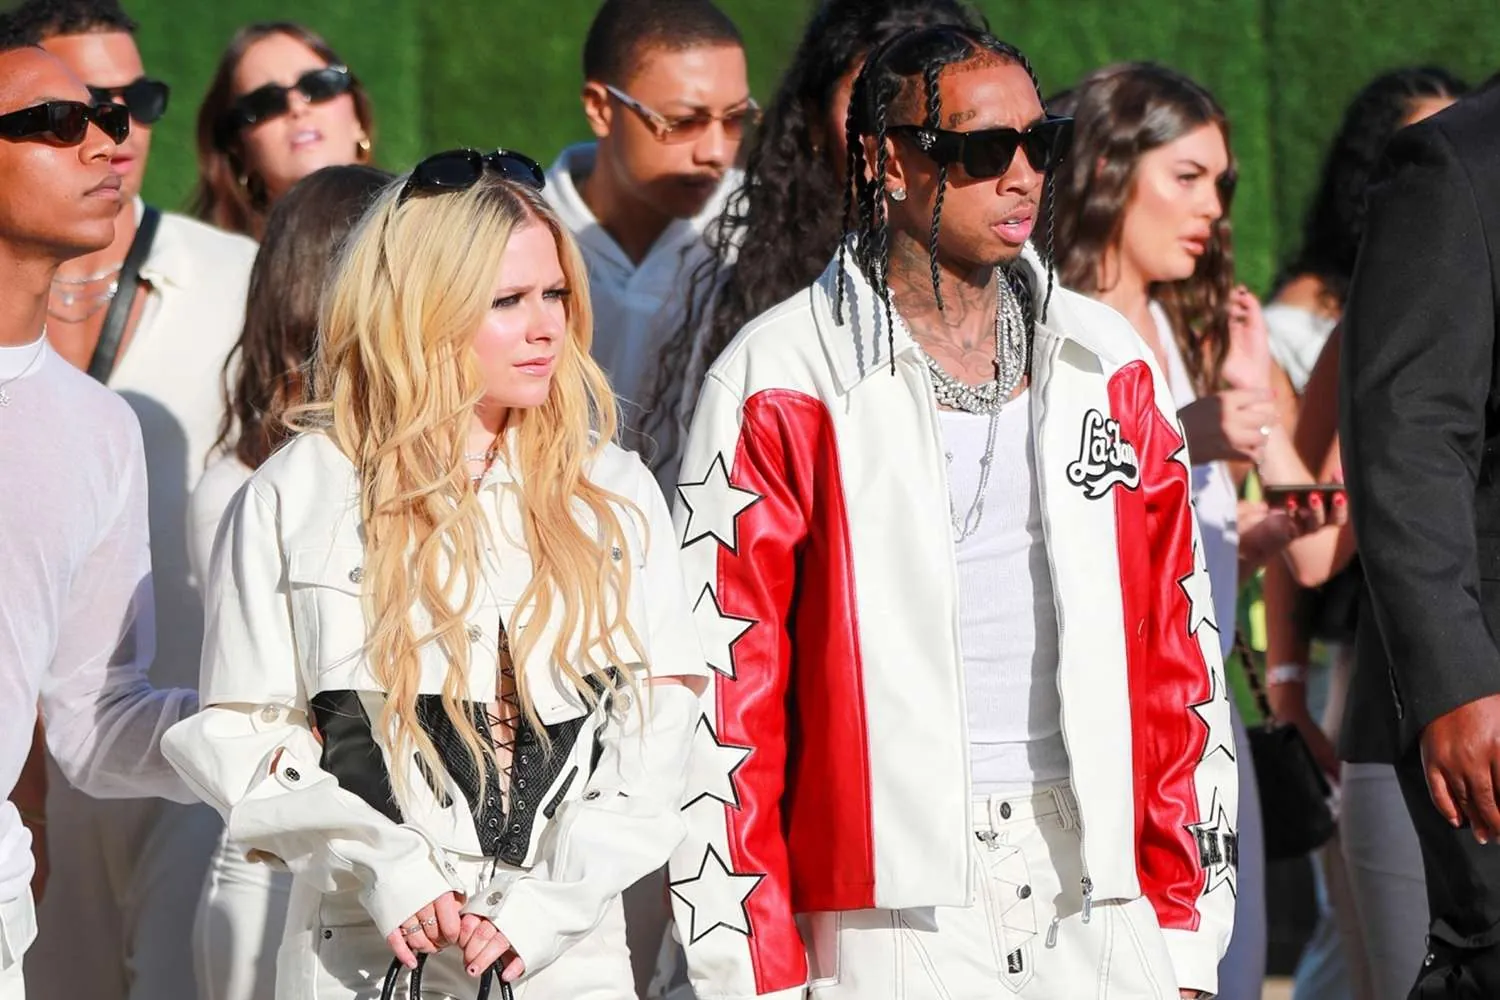 Avril Lavigne And Tyga Attend Fourth Of July Party Together After Breakup